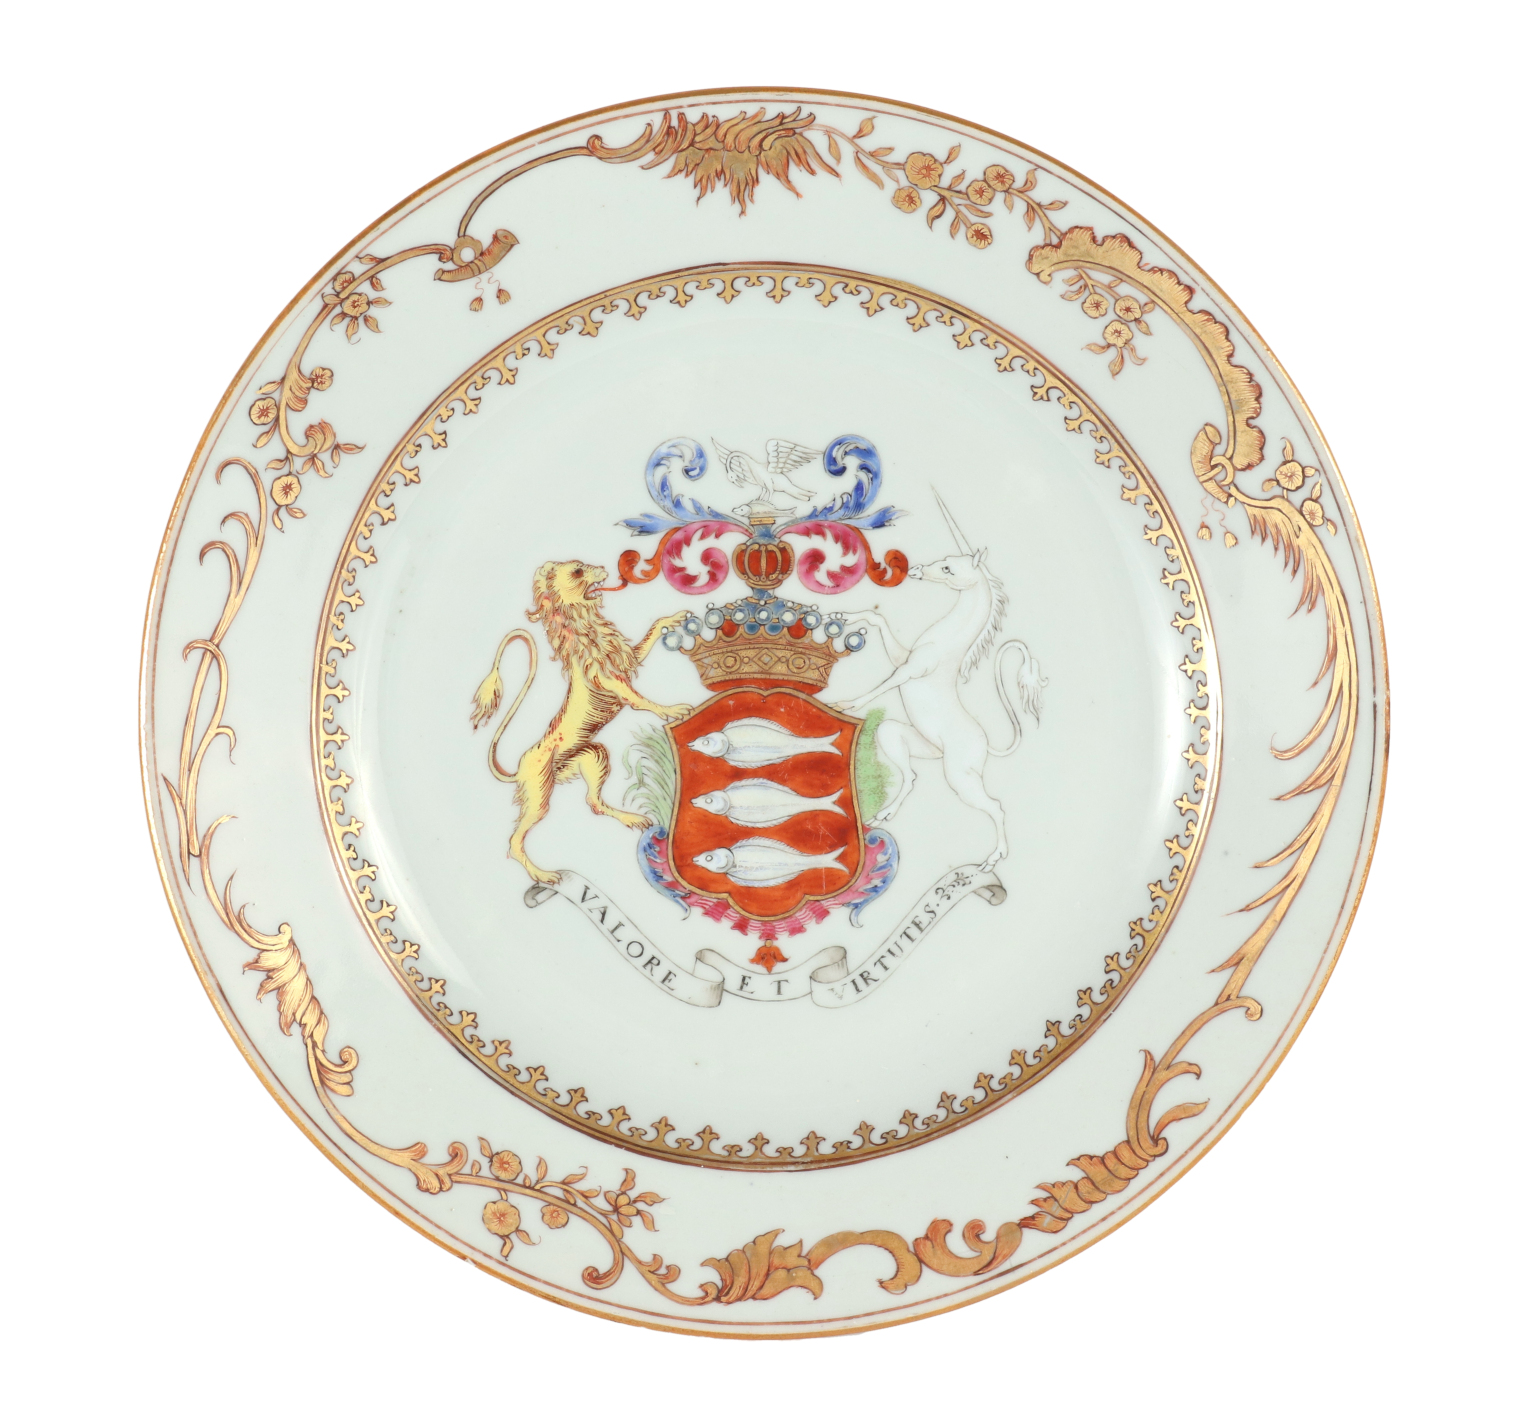 Chinese Export Armorial Plate Made for the Irish Market, c. 1750